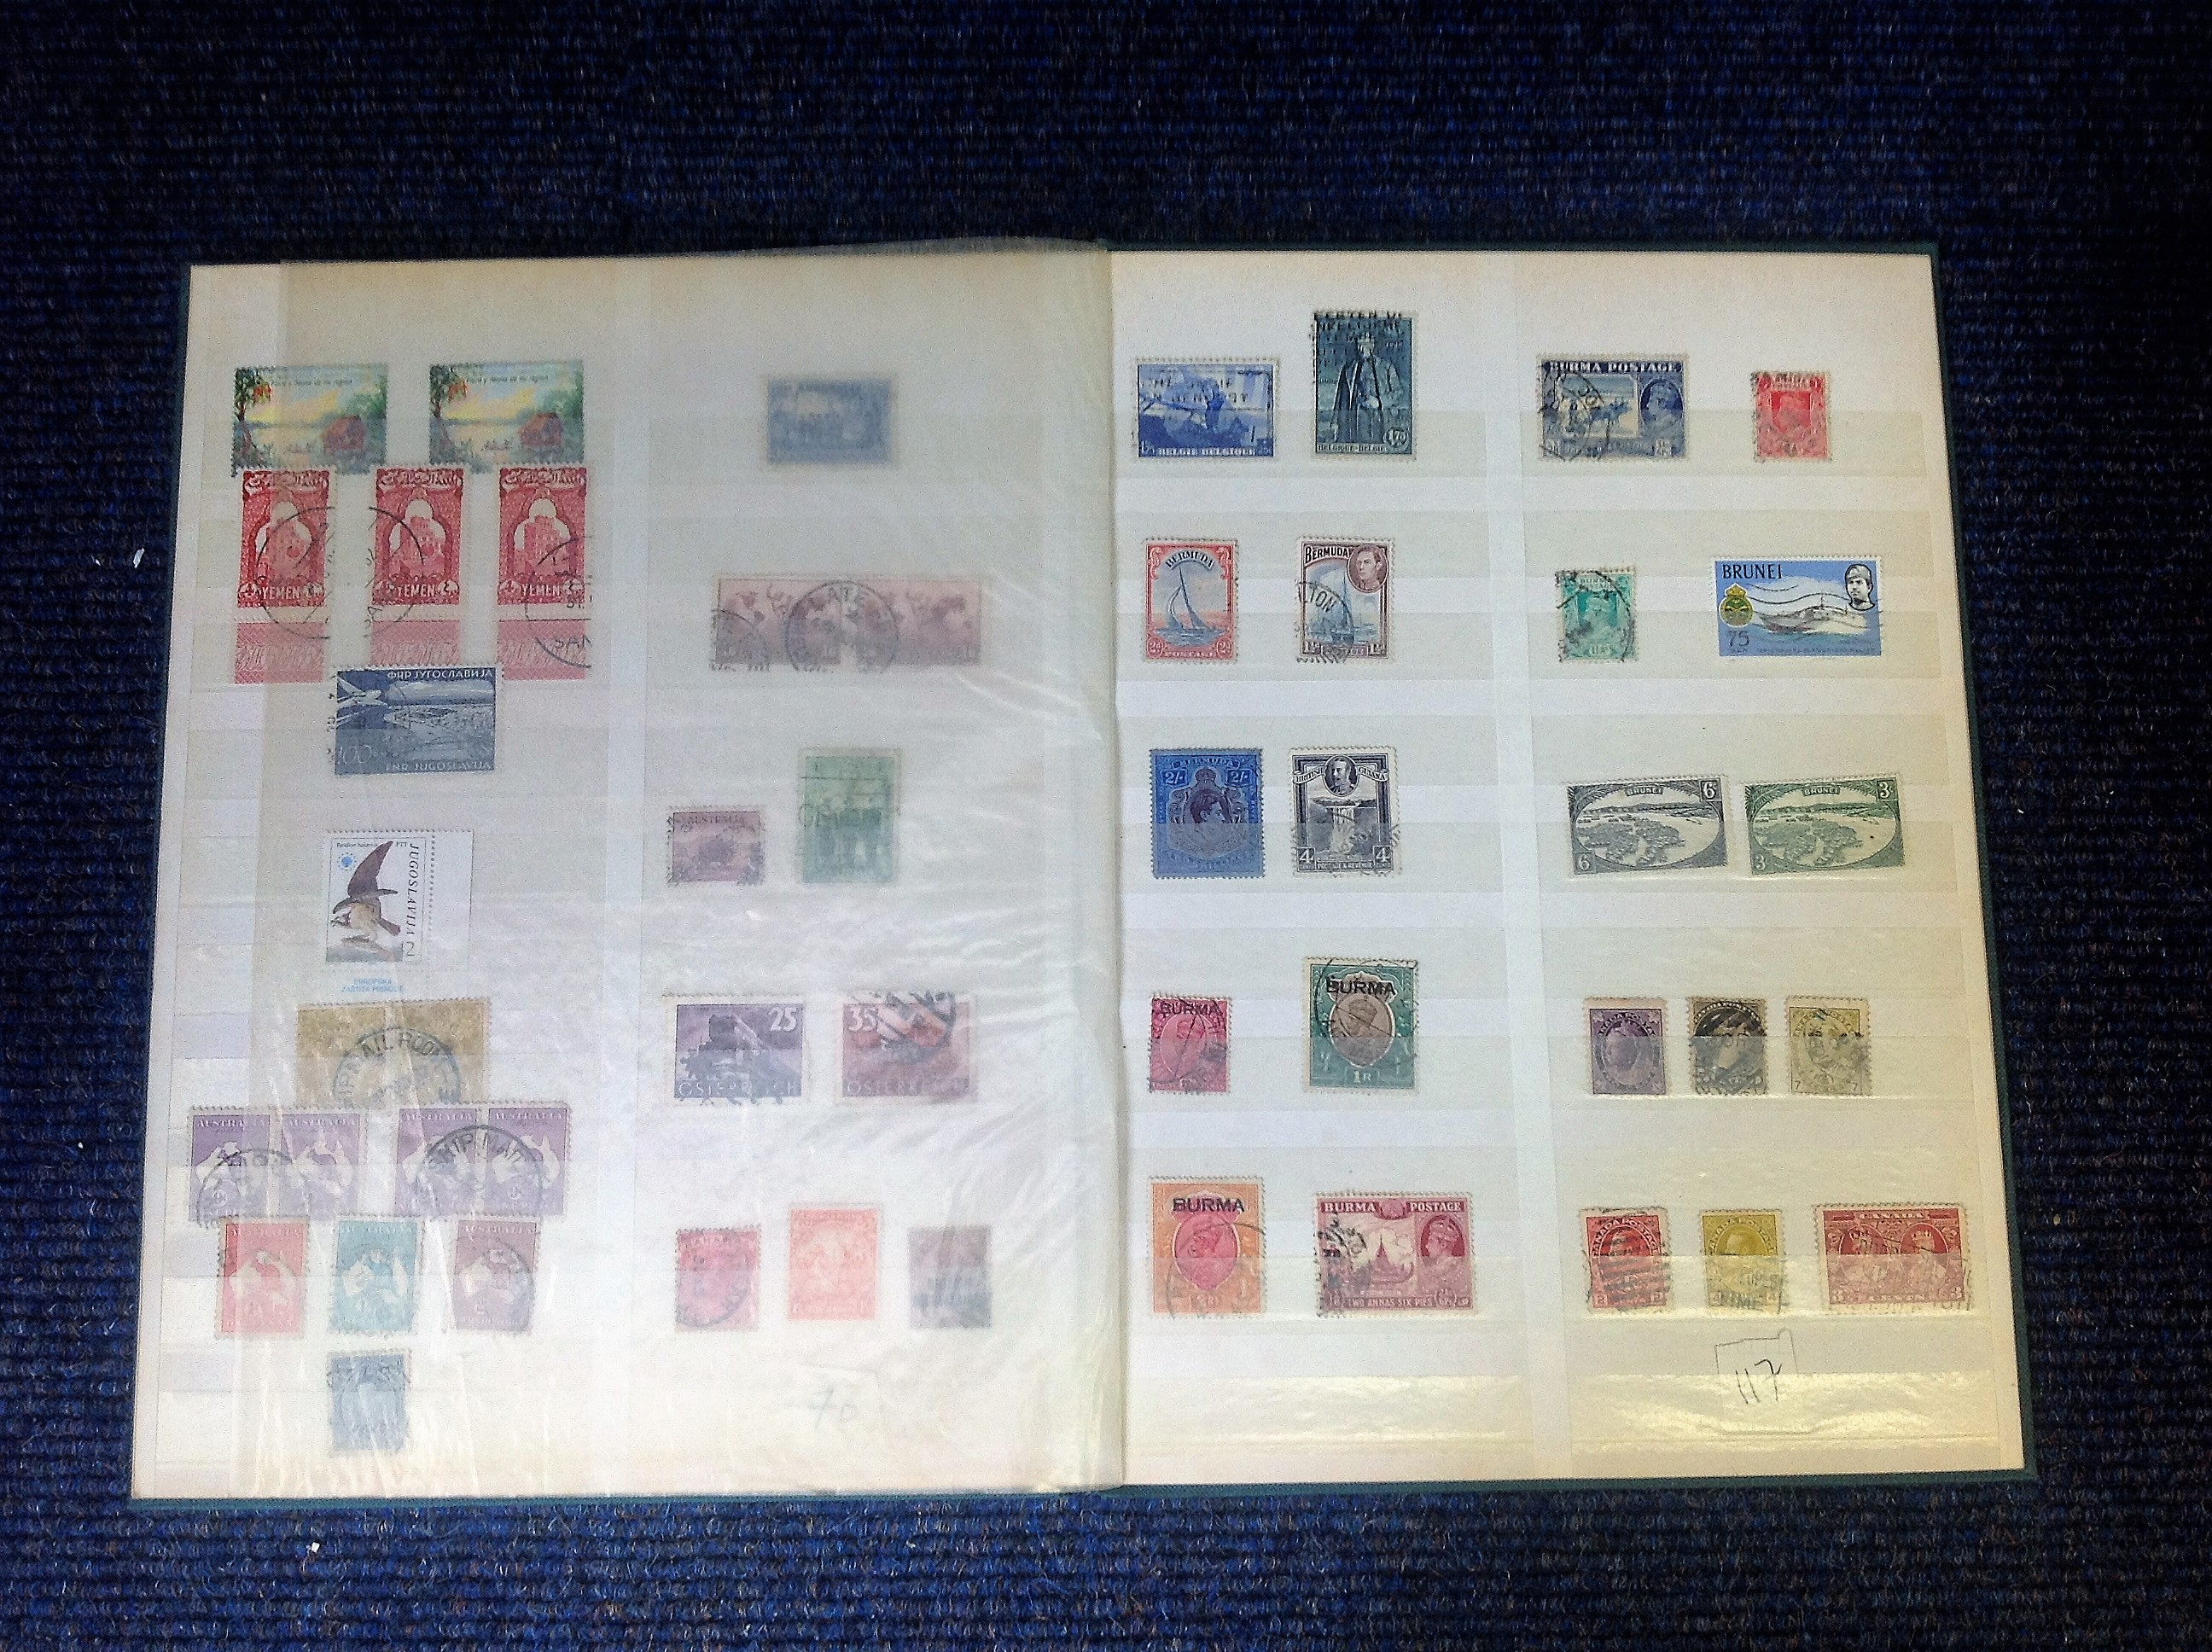 World High value stamp collection in green stock book. Includes stamps from Australia, Germany, - Image 5 of 6